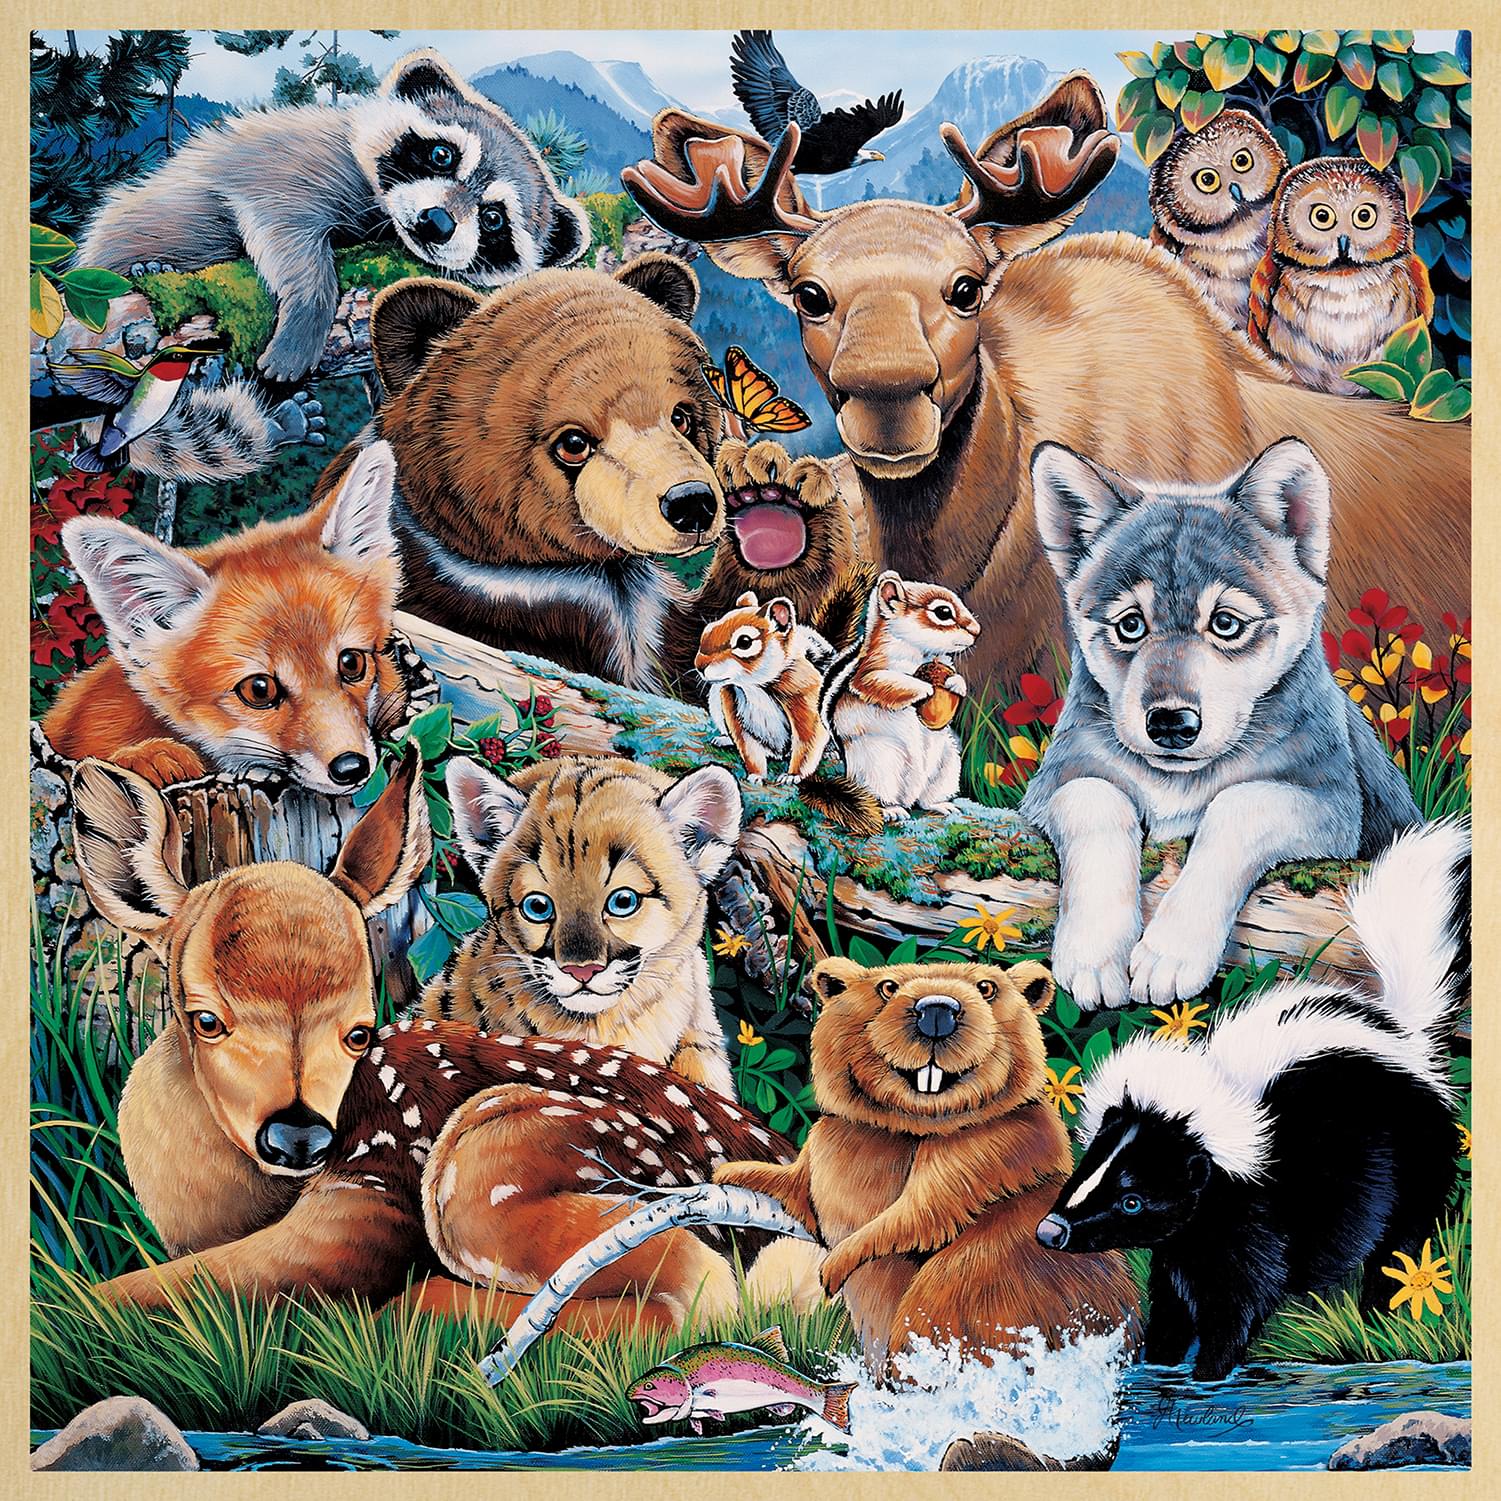 Forest Friends 48 Piece Real Wood Jigsaw Puzzle